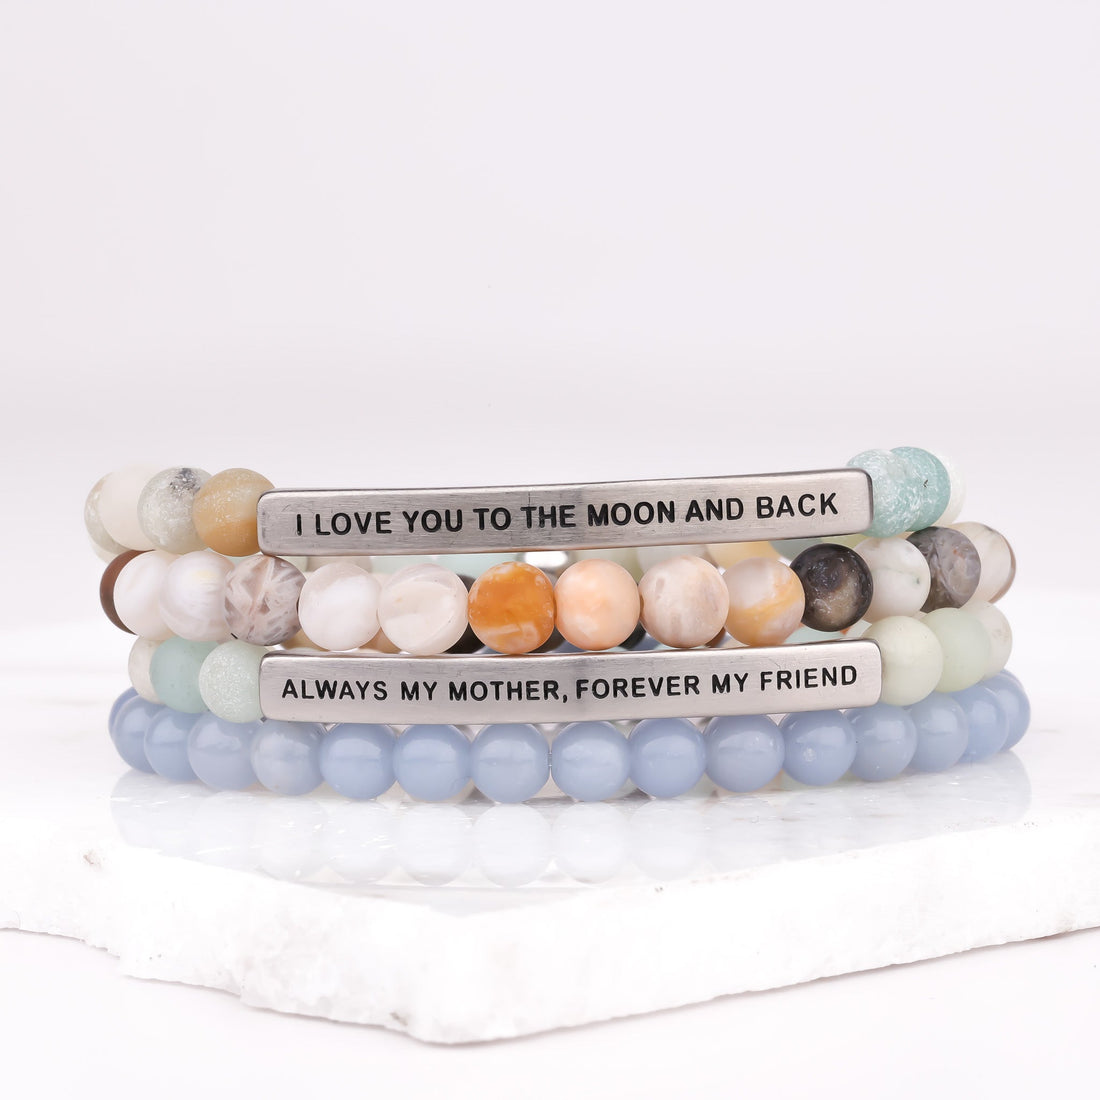 I LOVE YOU TO THE MOON AND BACK GIFT SET - AMAZONITE - Inspiration Co.